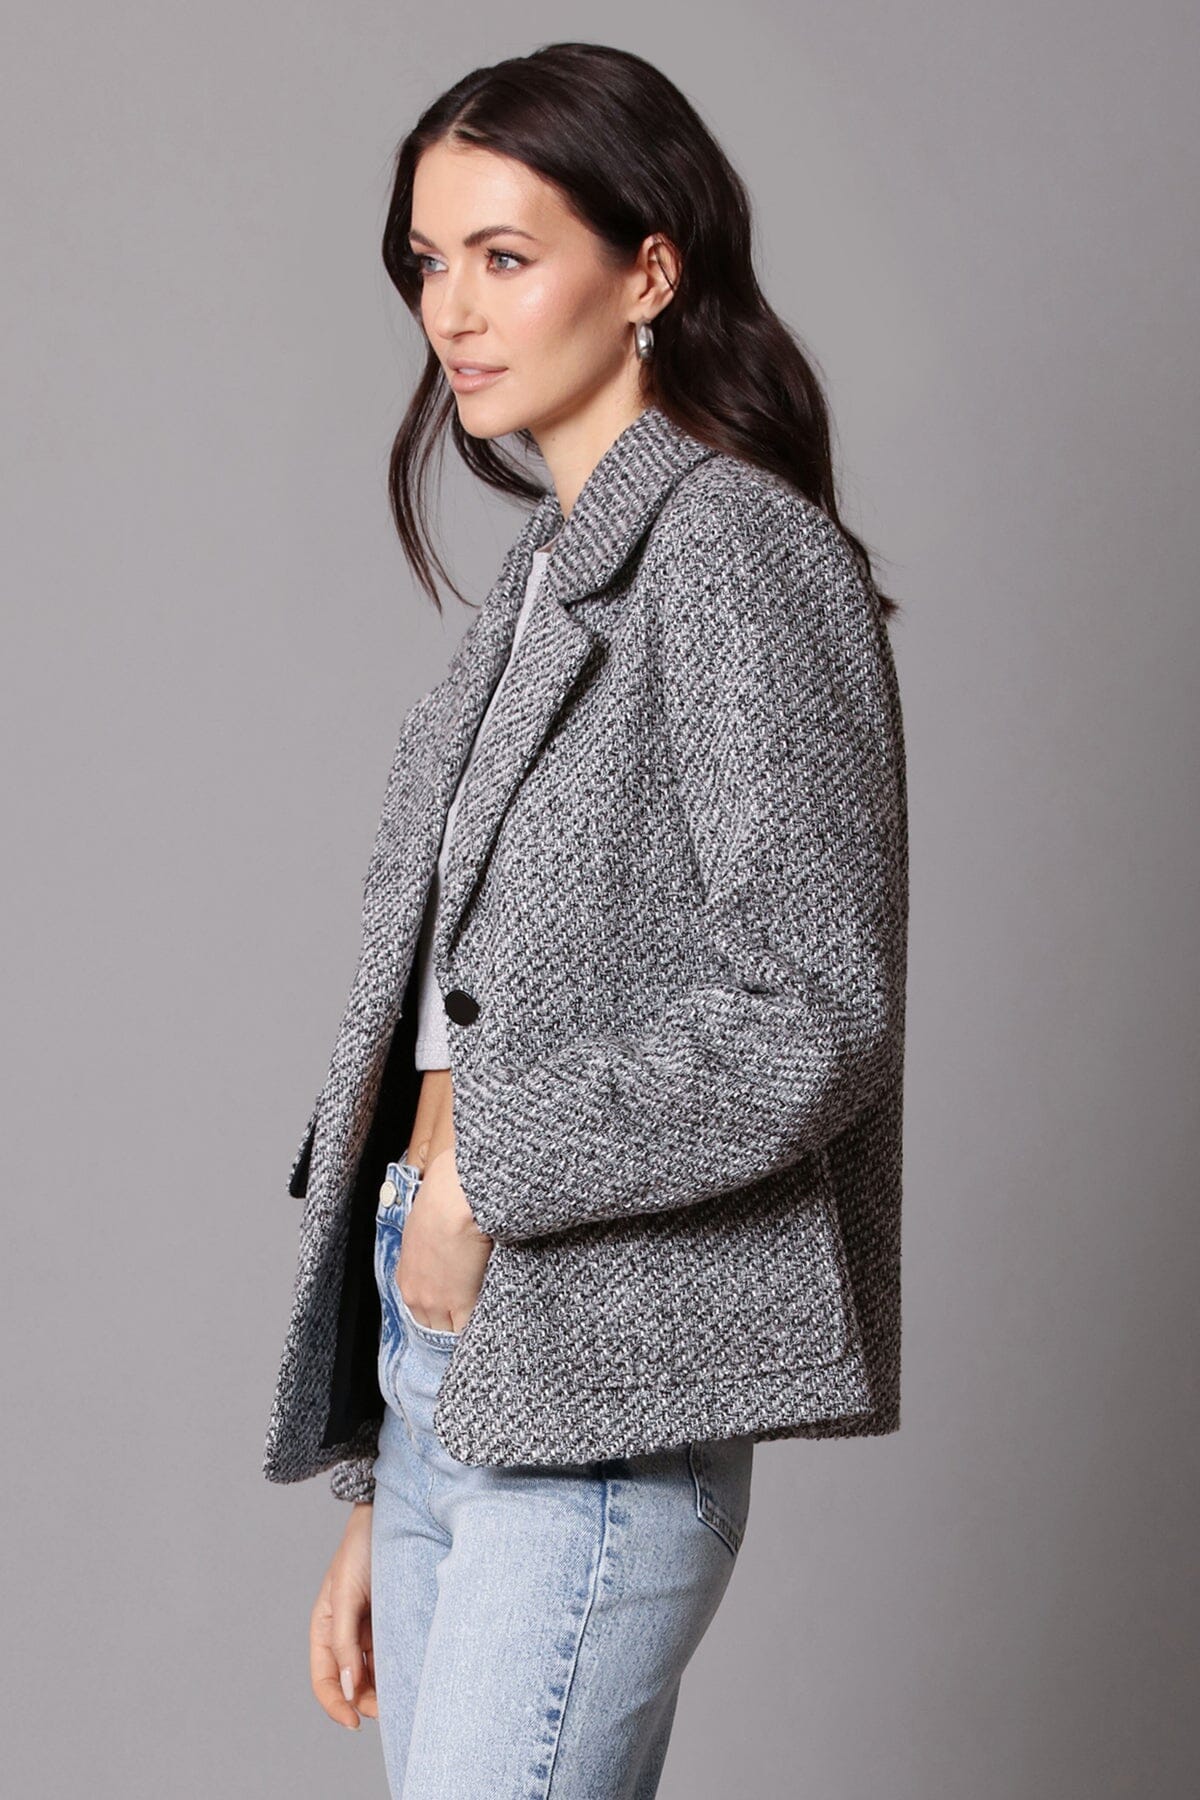 Grey relaxed retro tweed blazer coat jacket - women's figure flattering casual to dressy blazers jackets outerwear for Fall trends